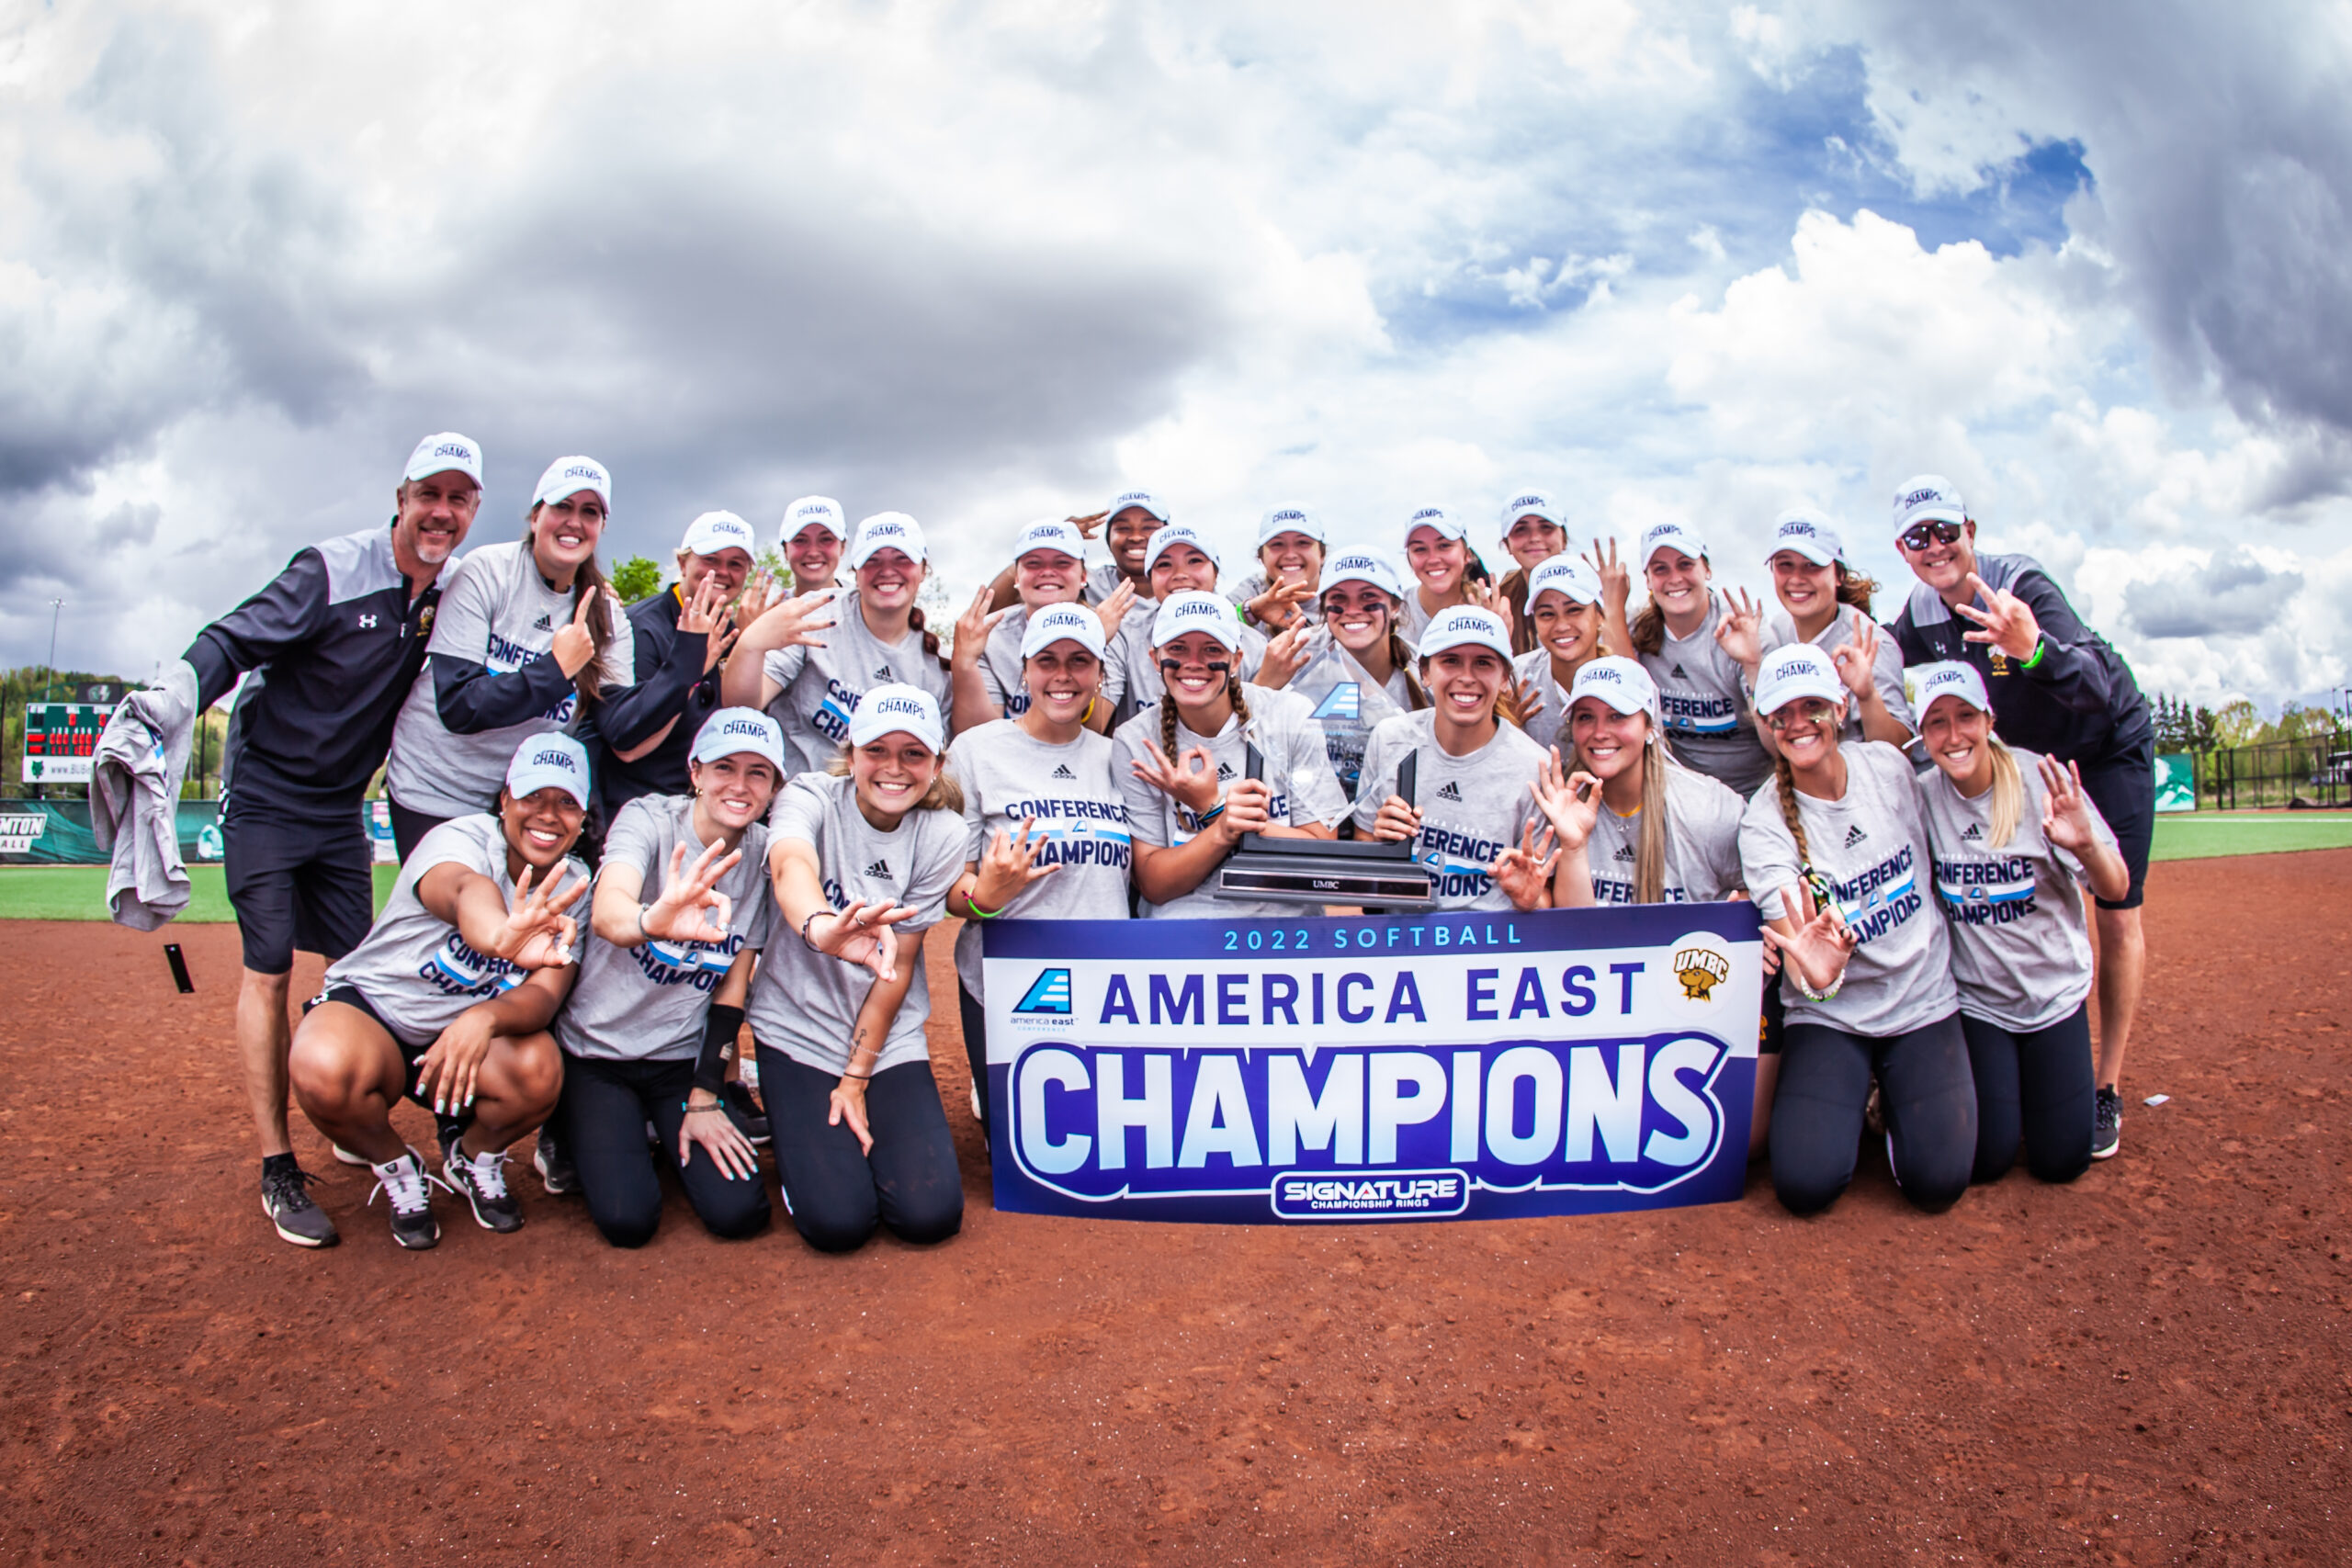 Softball players and coaches smile around "America East Champions" sign, holding 3 fingers up.